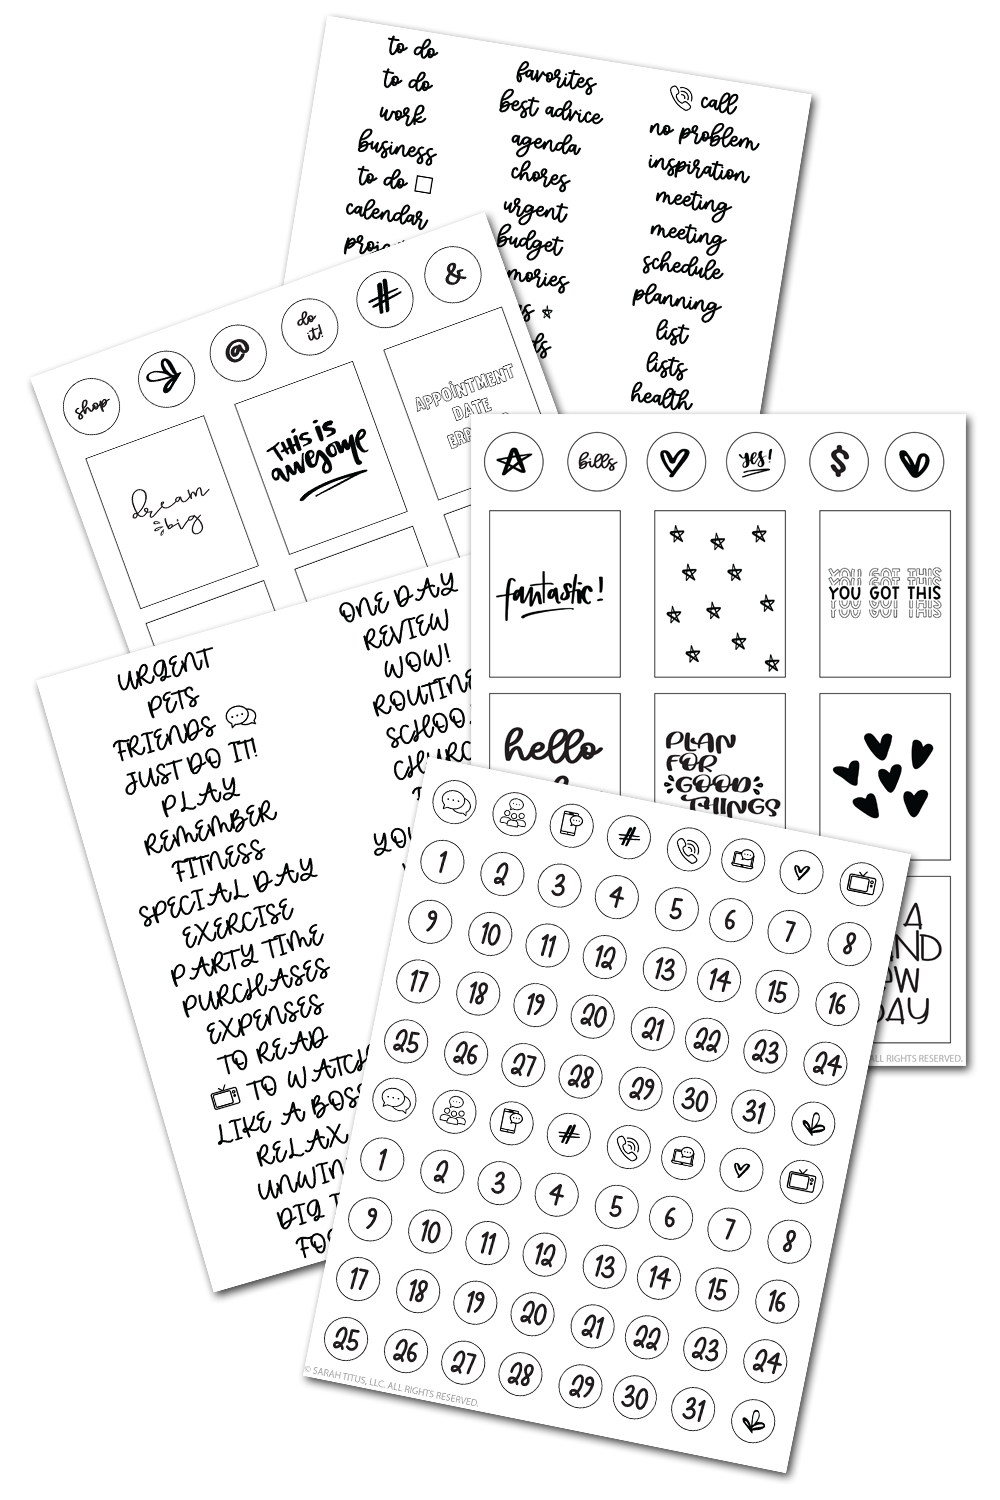 Every Day (1-31) Stickers for Planners & Bullet Journals